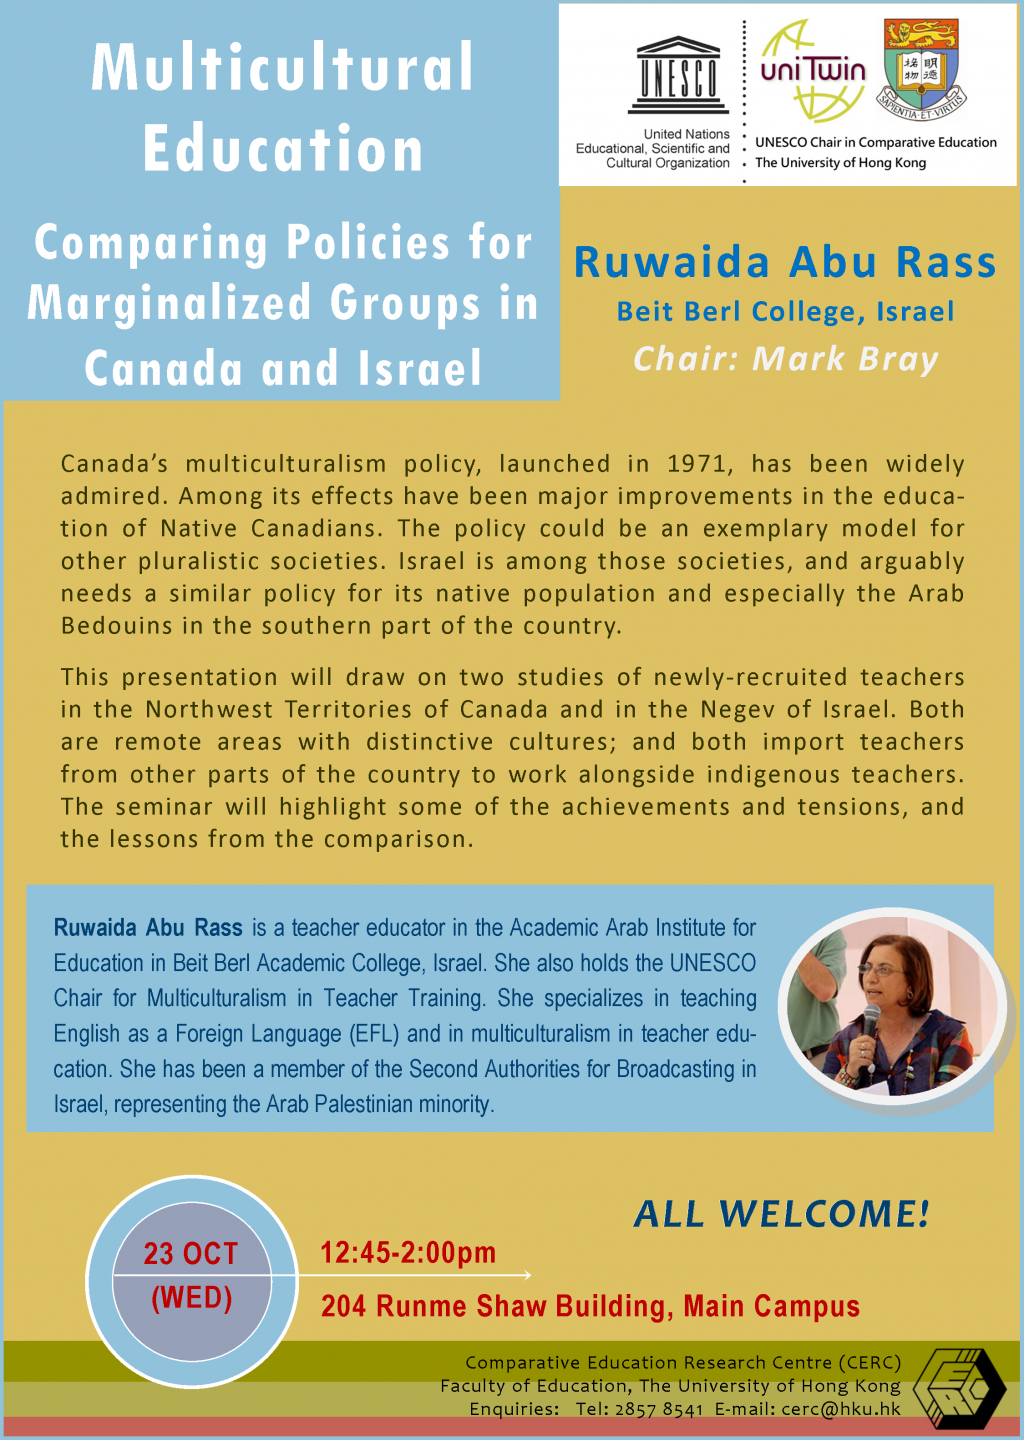 Seminar: Multicultural Education: Comparing Policies for Marginalized Groups in Canada and Israel